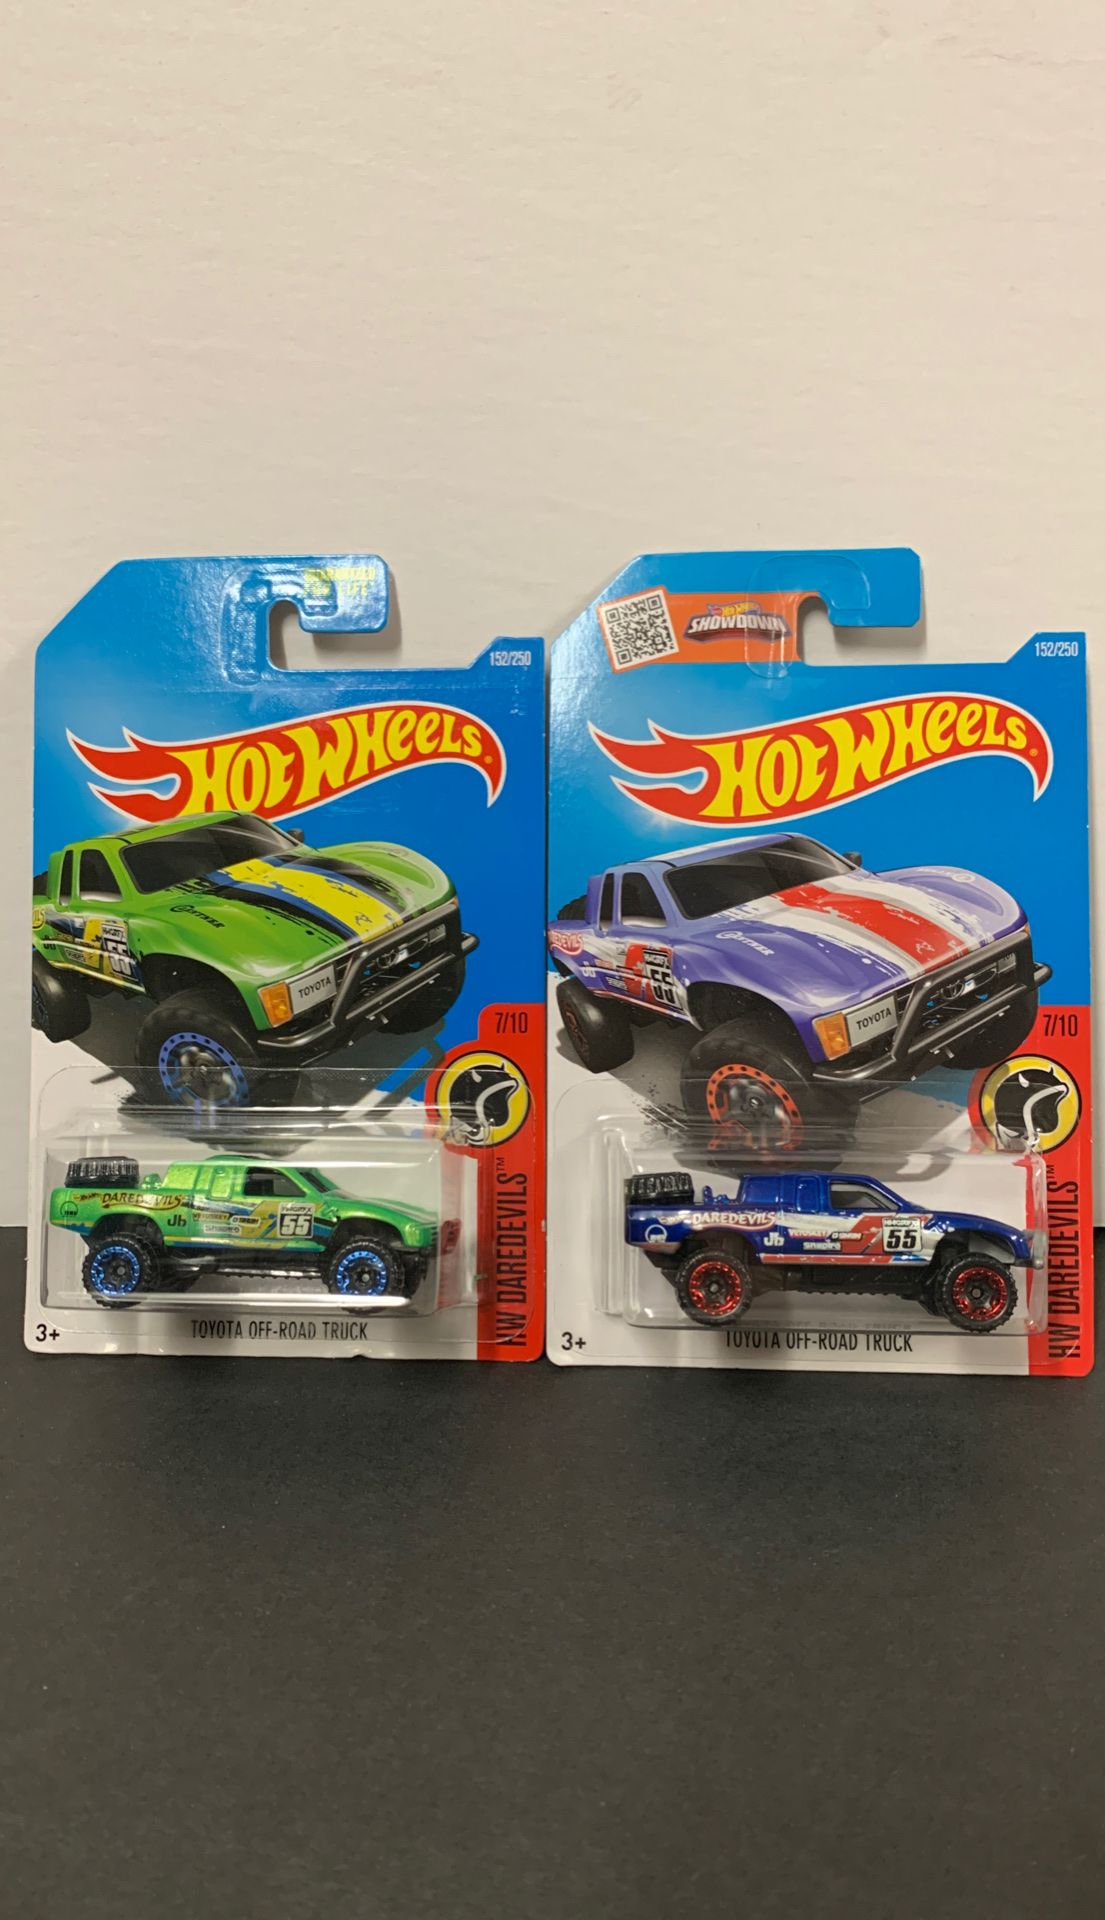 Pair of Hot Wheels Diecast Toyota Off Road Truck